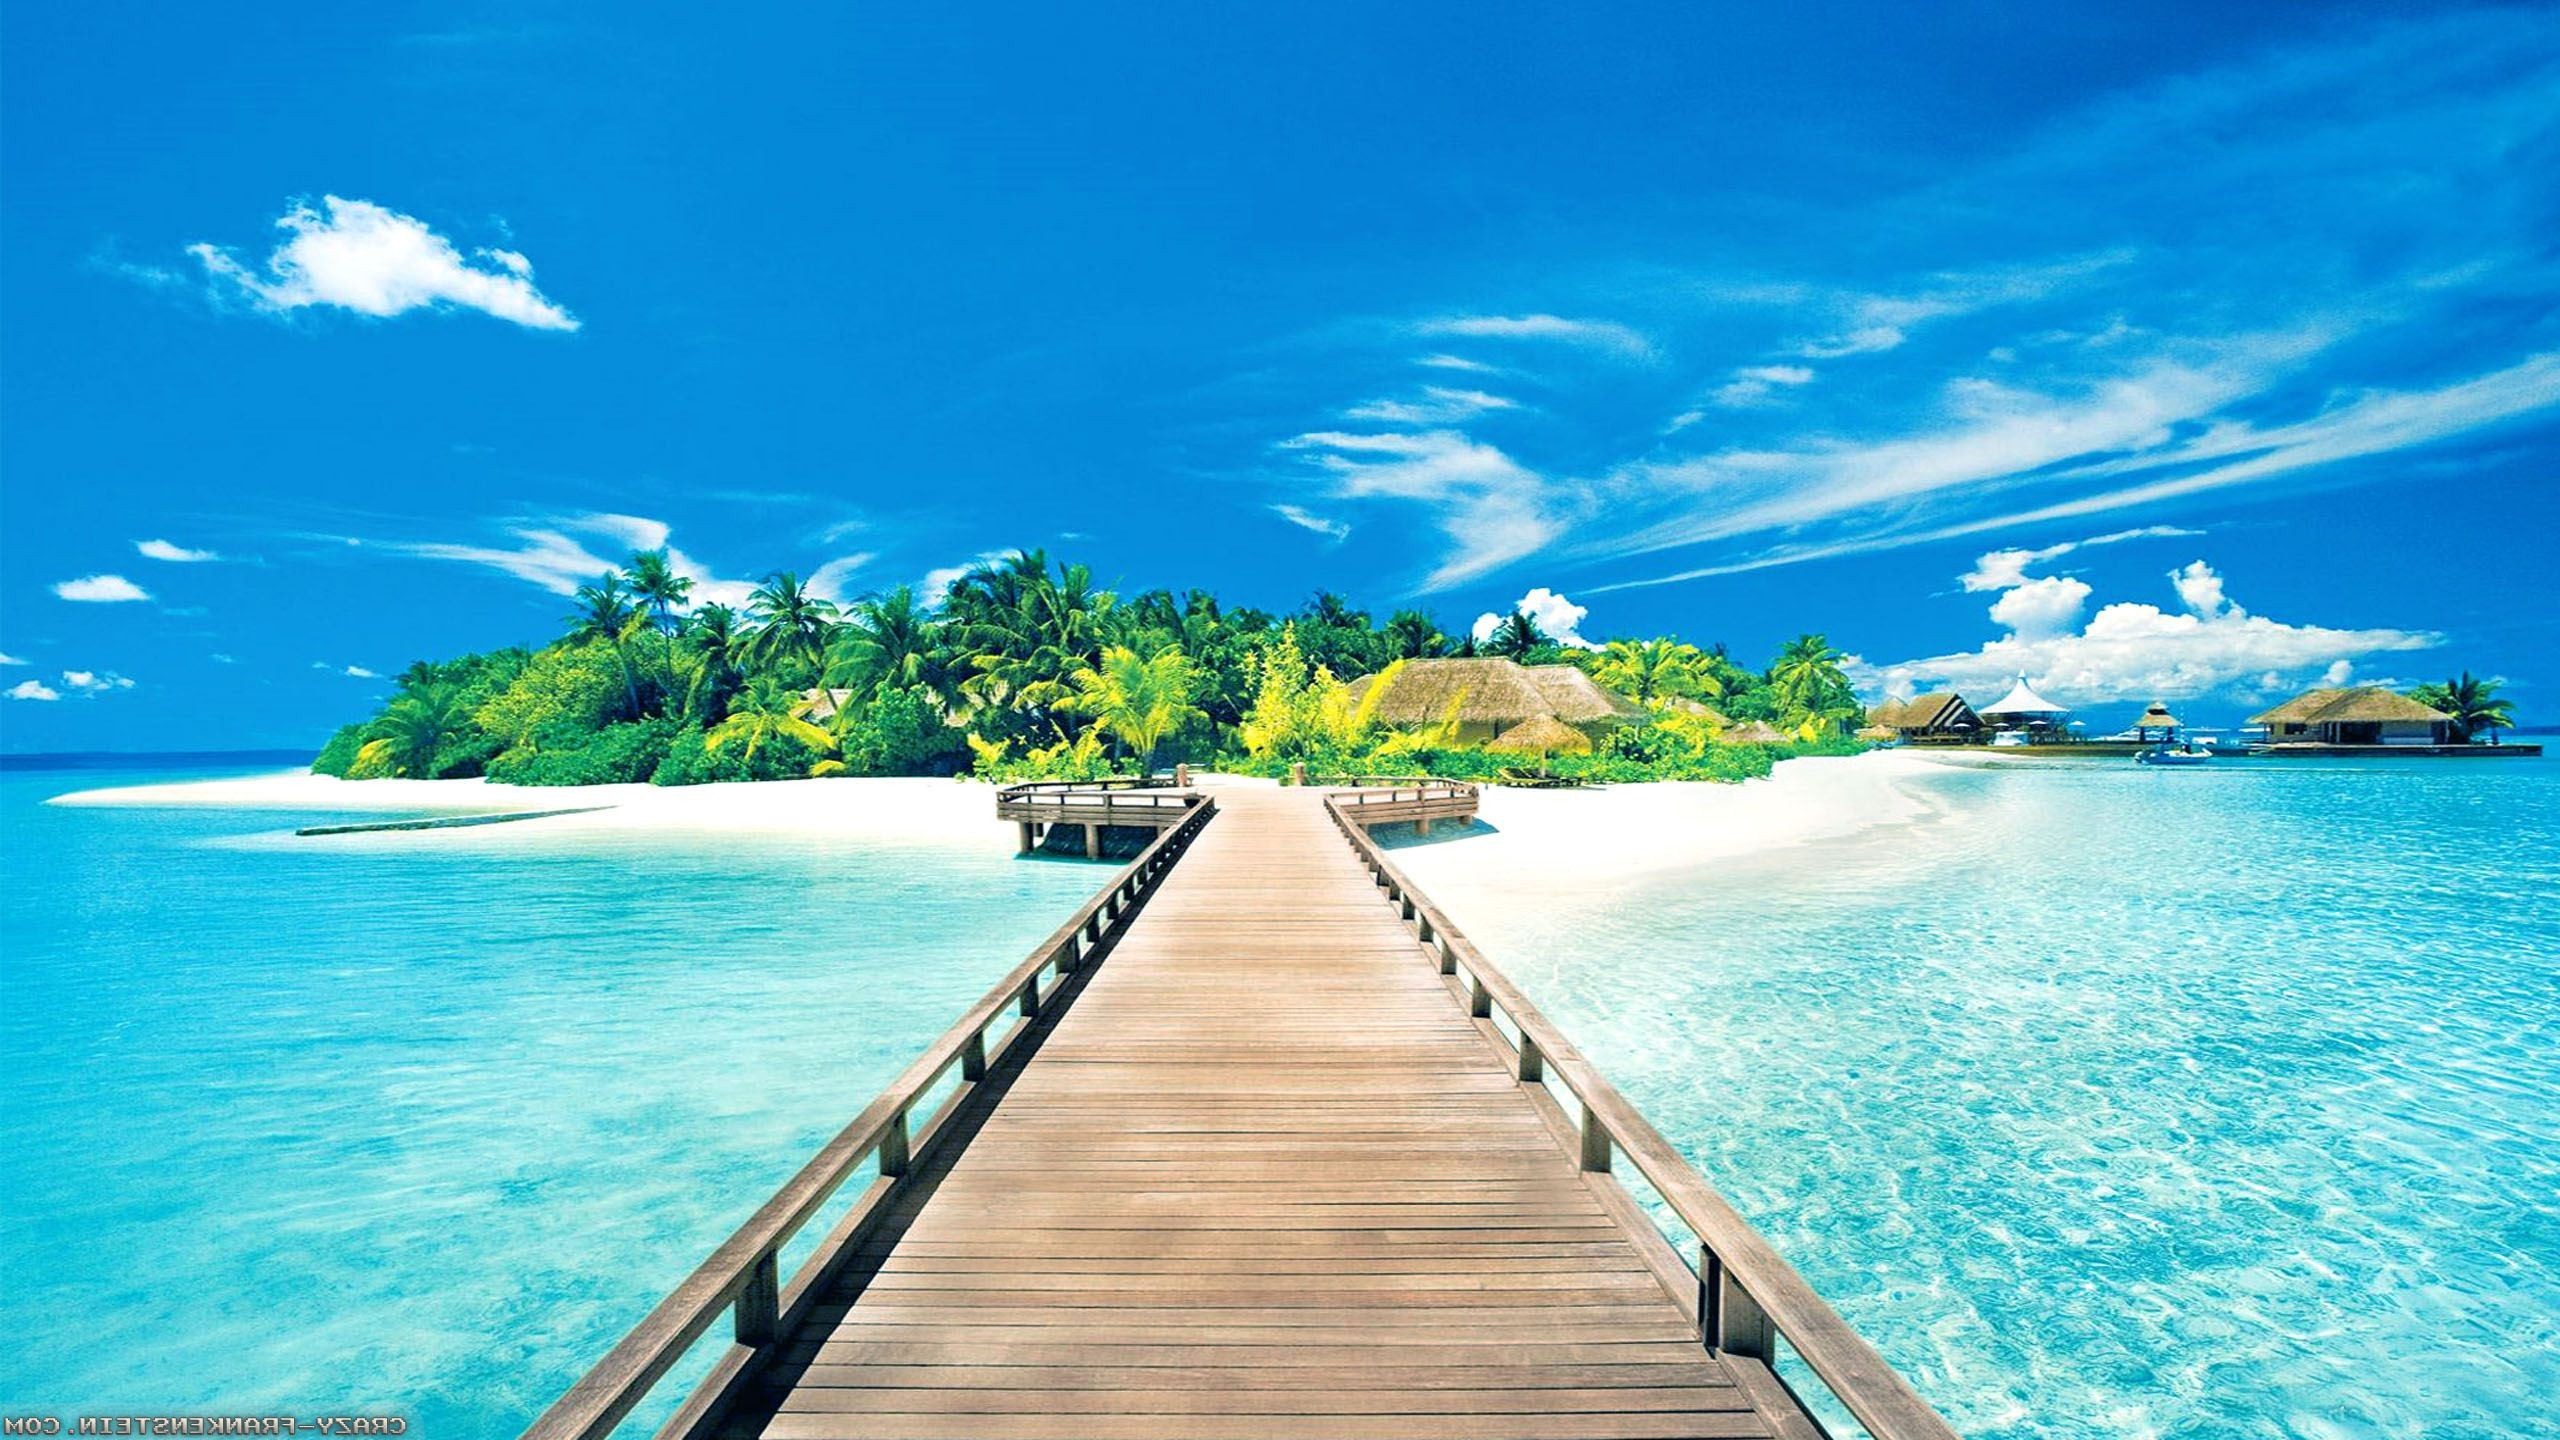 2560x1440  Tropical Island Wallpaper - Android Apps on Google Play .